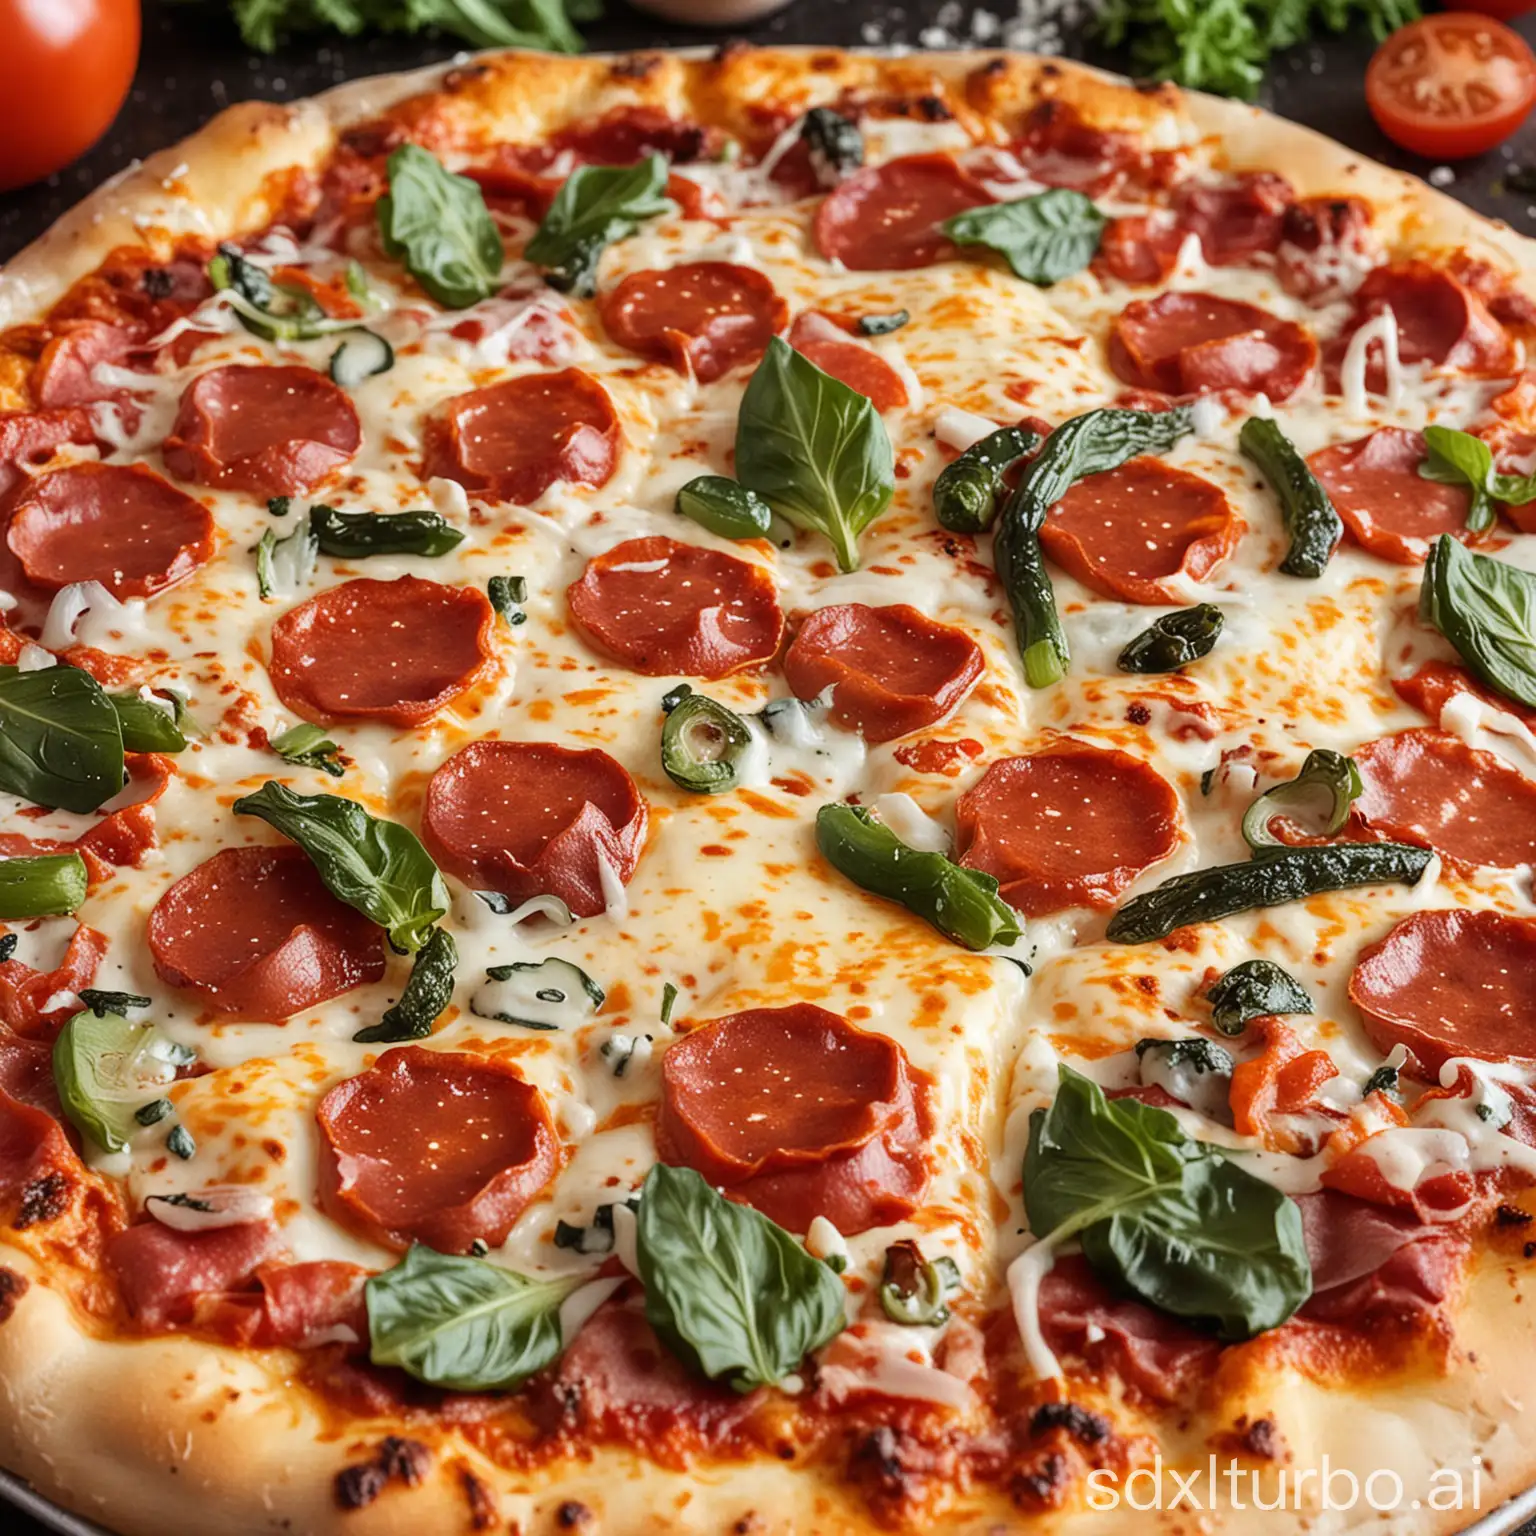 A close-up of a freshly baked pizza. The pizza is topped with melted cheese, pepperoni, and vegetables. The crust is golden brown and the cheese is bubbly.